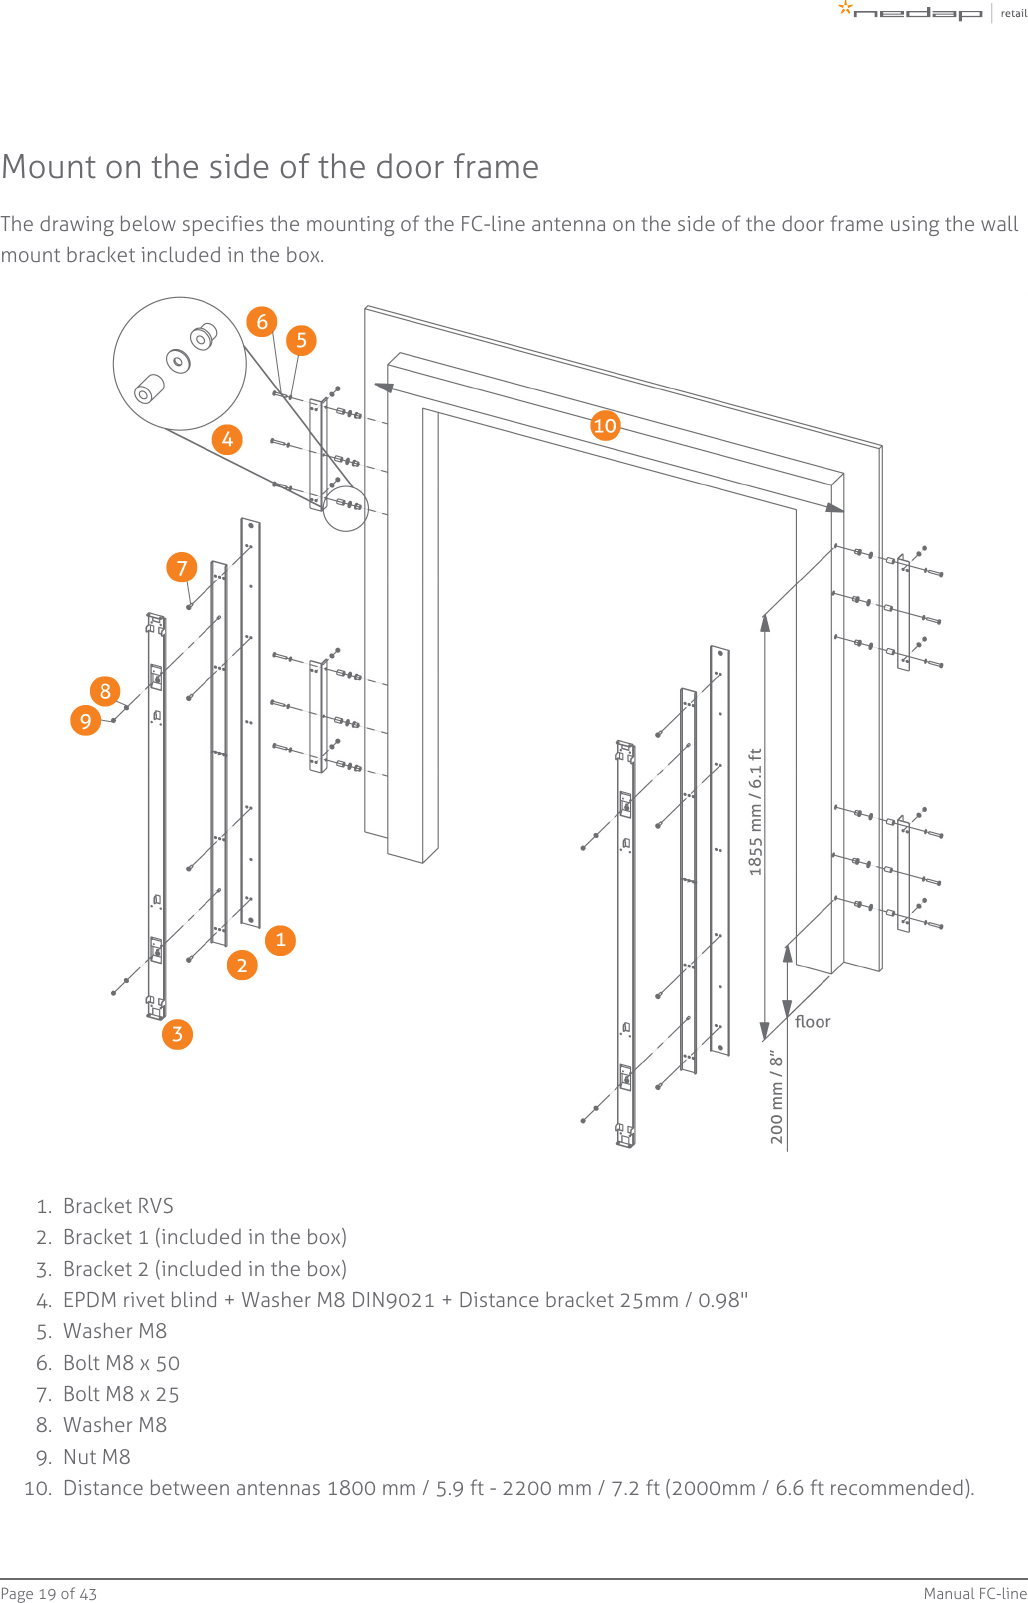 Page   of 19 43 Manual FC-line1.  2.  3.  4.  5.  6.  7.  8.  9.  10.  Mount on the side of the door frameThe drawing below specifies the mounting of the FC-line antenna on the side of the door frame using the wallmount bracket included in the box.Bracket RVSBracket 1 (included in the box)Bracket 2 (included in the box)EPDM rivet blind + Washer M8 DIN9021 + Distance bracket 25mm / 0.98&quot;Washer M8Bolt M8 x 50Bolt M8 x 25Washer M8Nut M8Distance between antennas 1800 mm / 5.9 ft - 2200 mm / 7.2 ft (2000mm / 6.6 ft recommended).